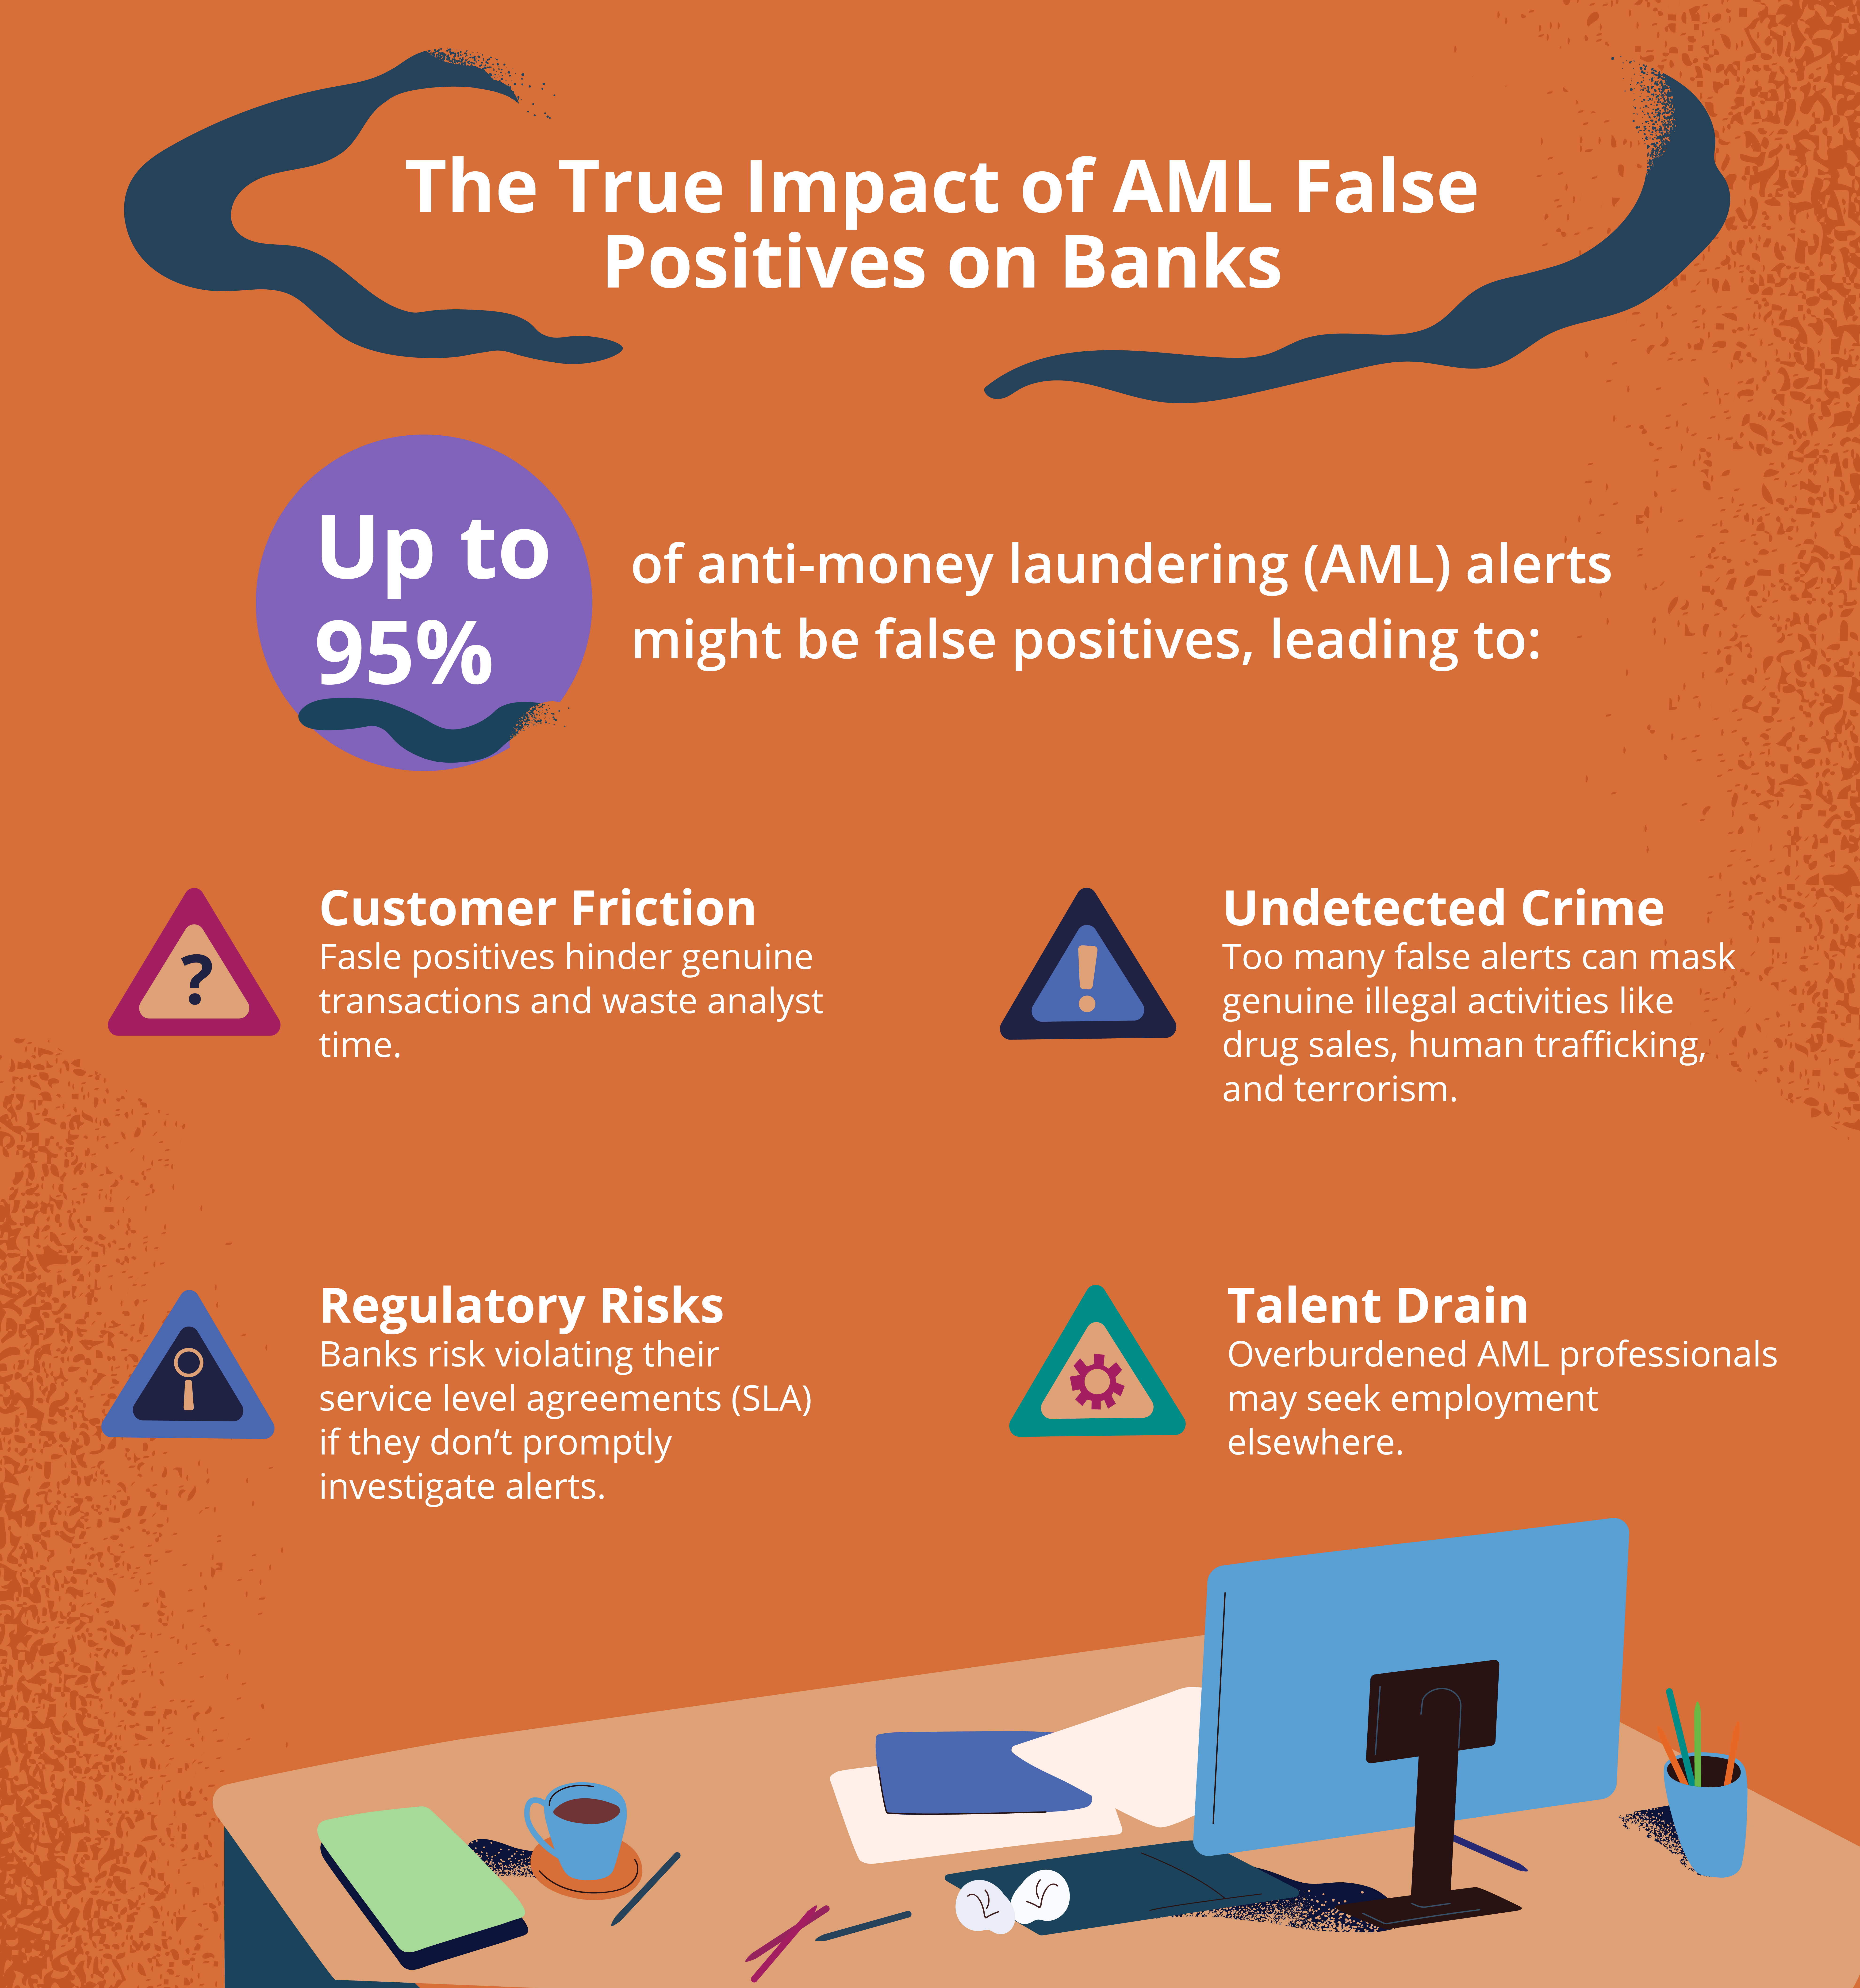 Illustration outlining the True Impact of AML False Positives on Banks: Customer Friction, Regulatory Risks, Undetected Crime, and Talent Drain